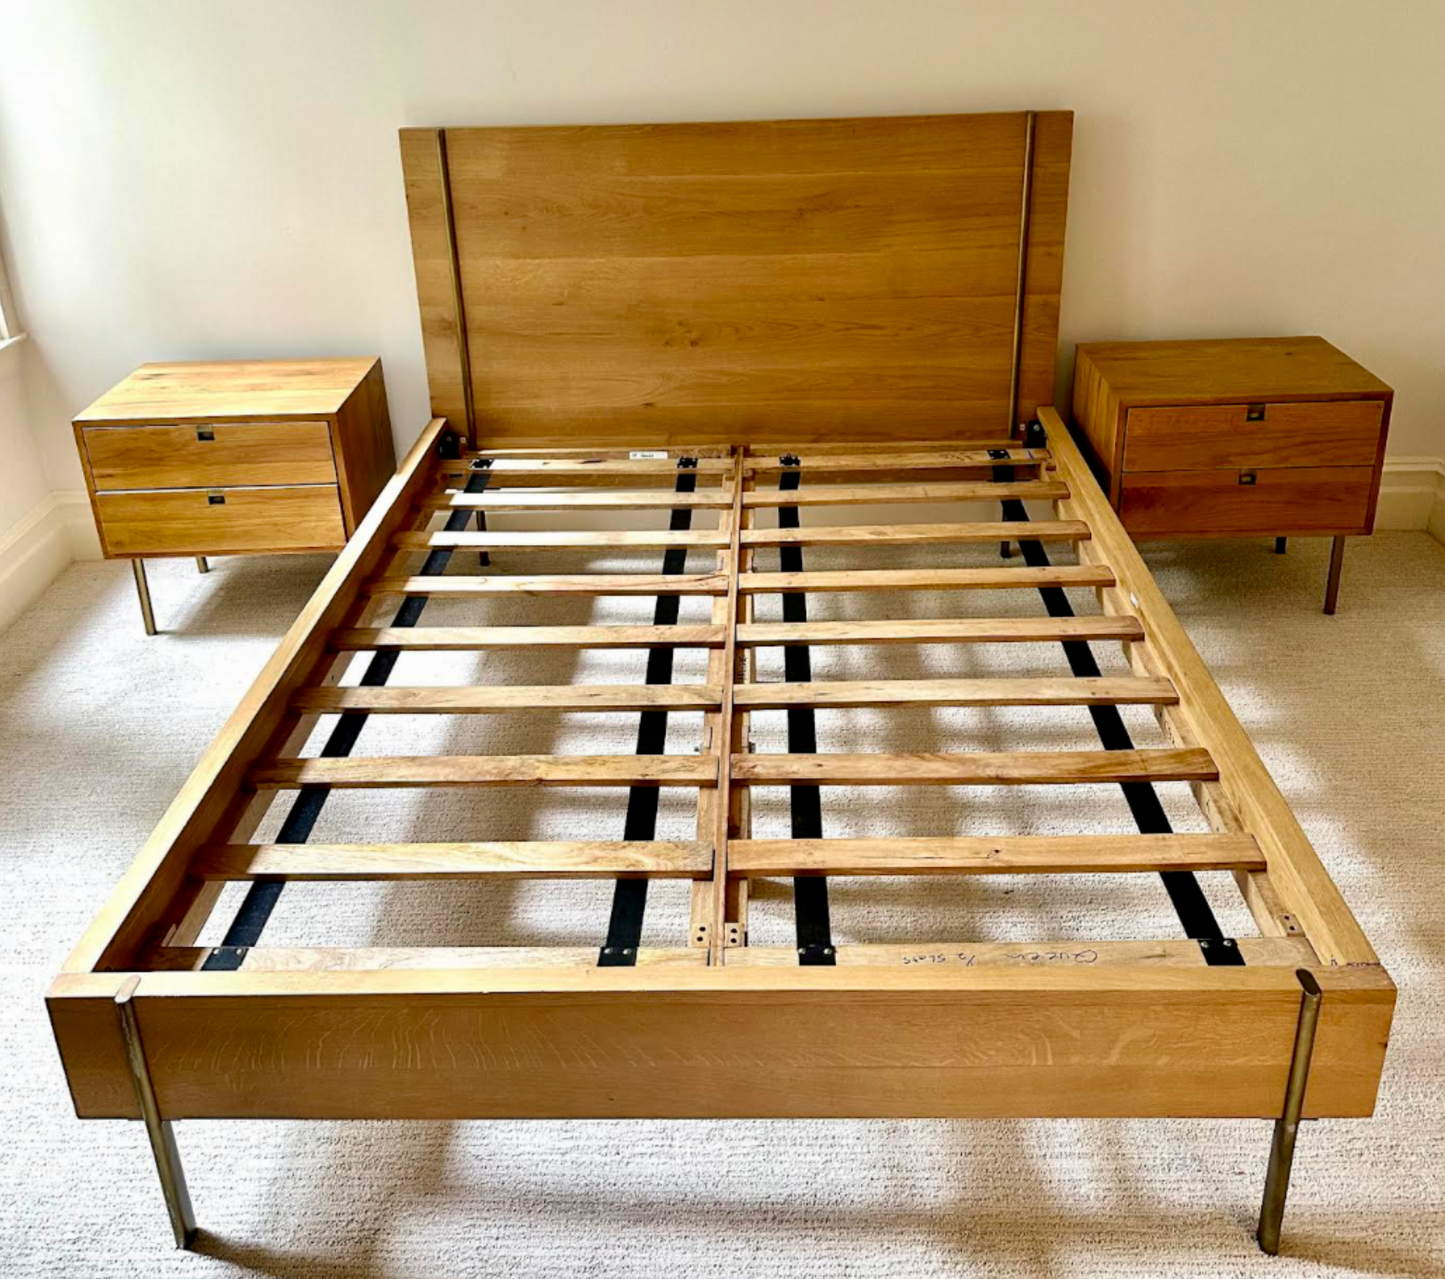 Solid natural oak Queen bed frame with linear accents of satin brass, Danish inspired